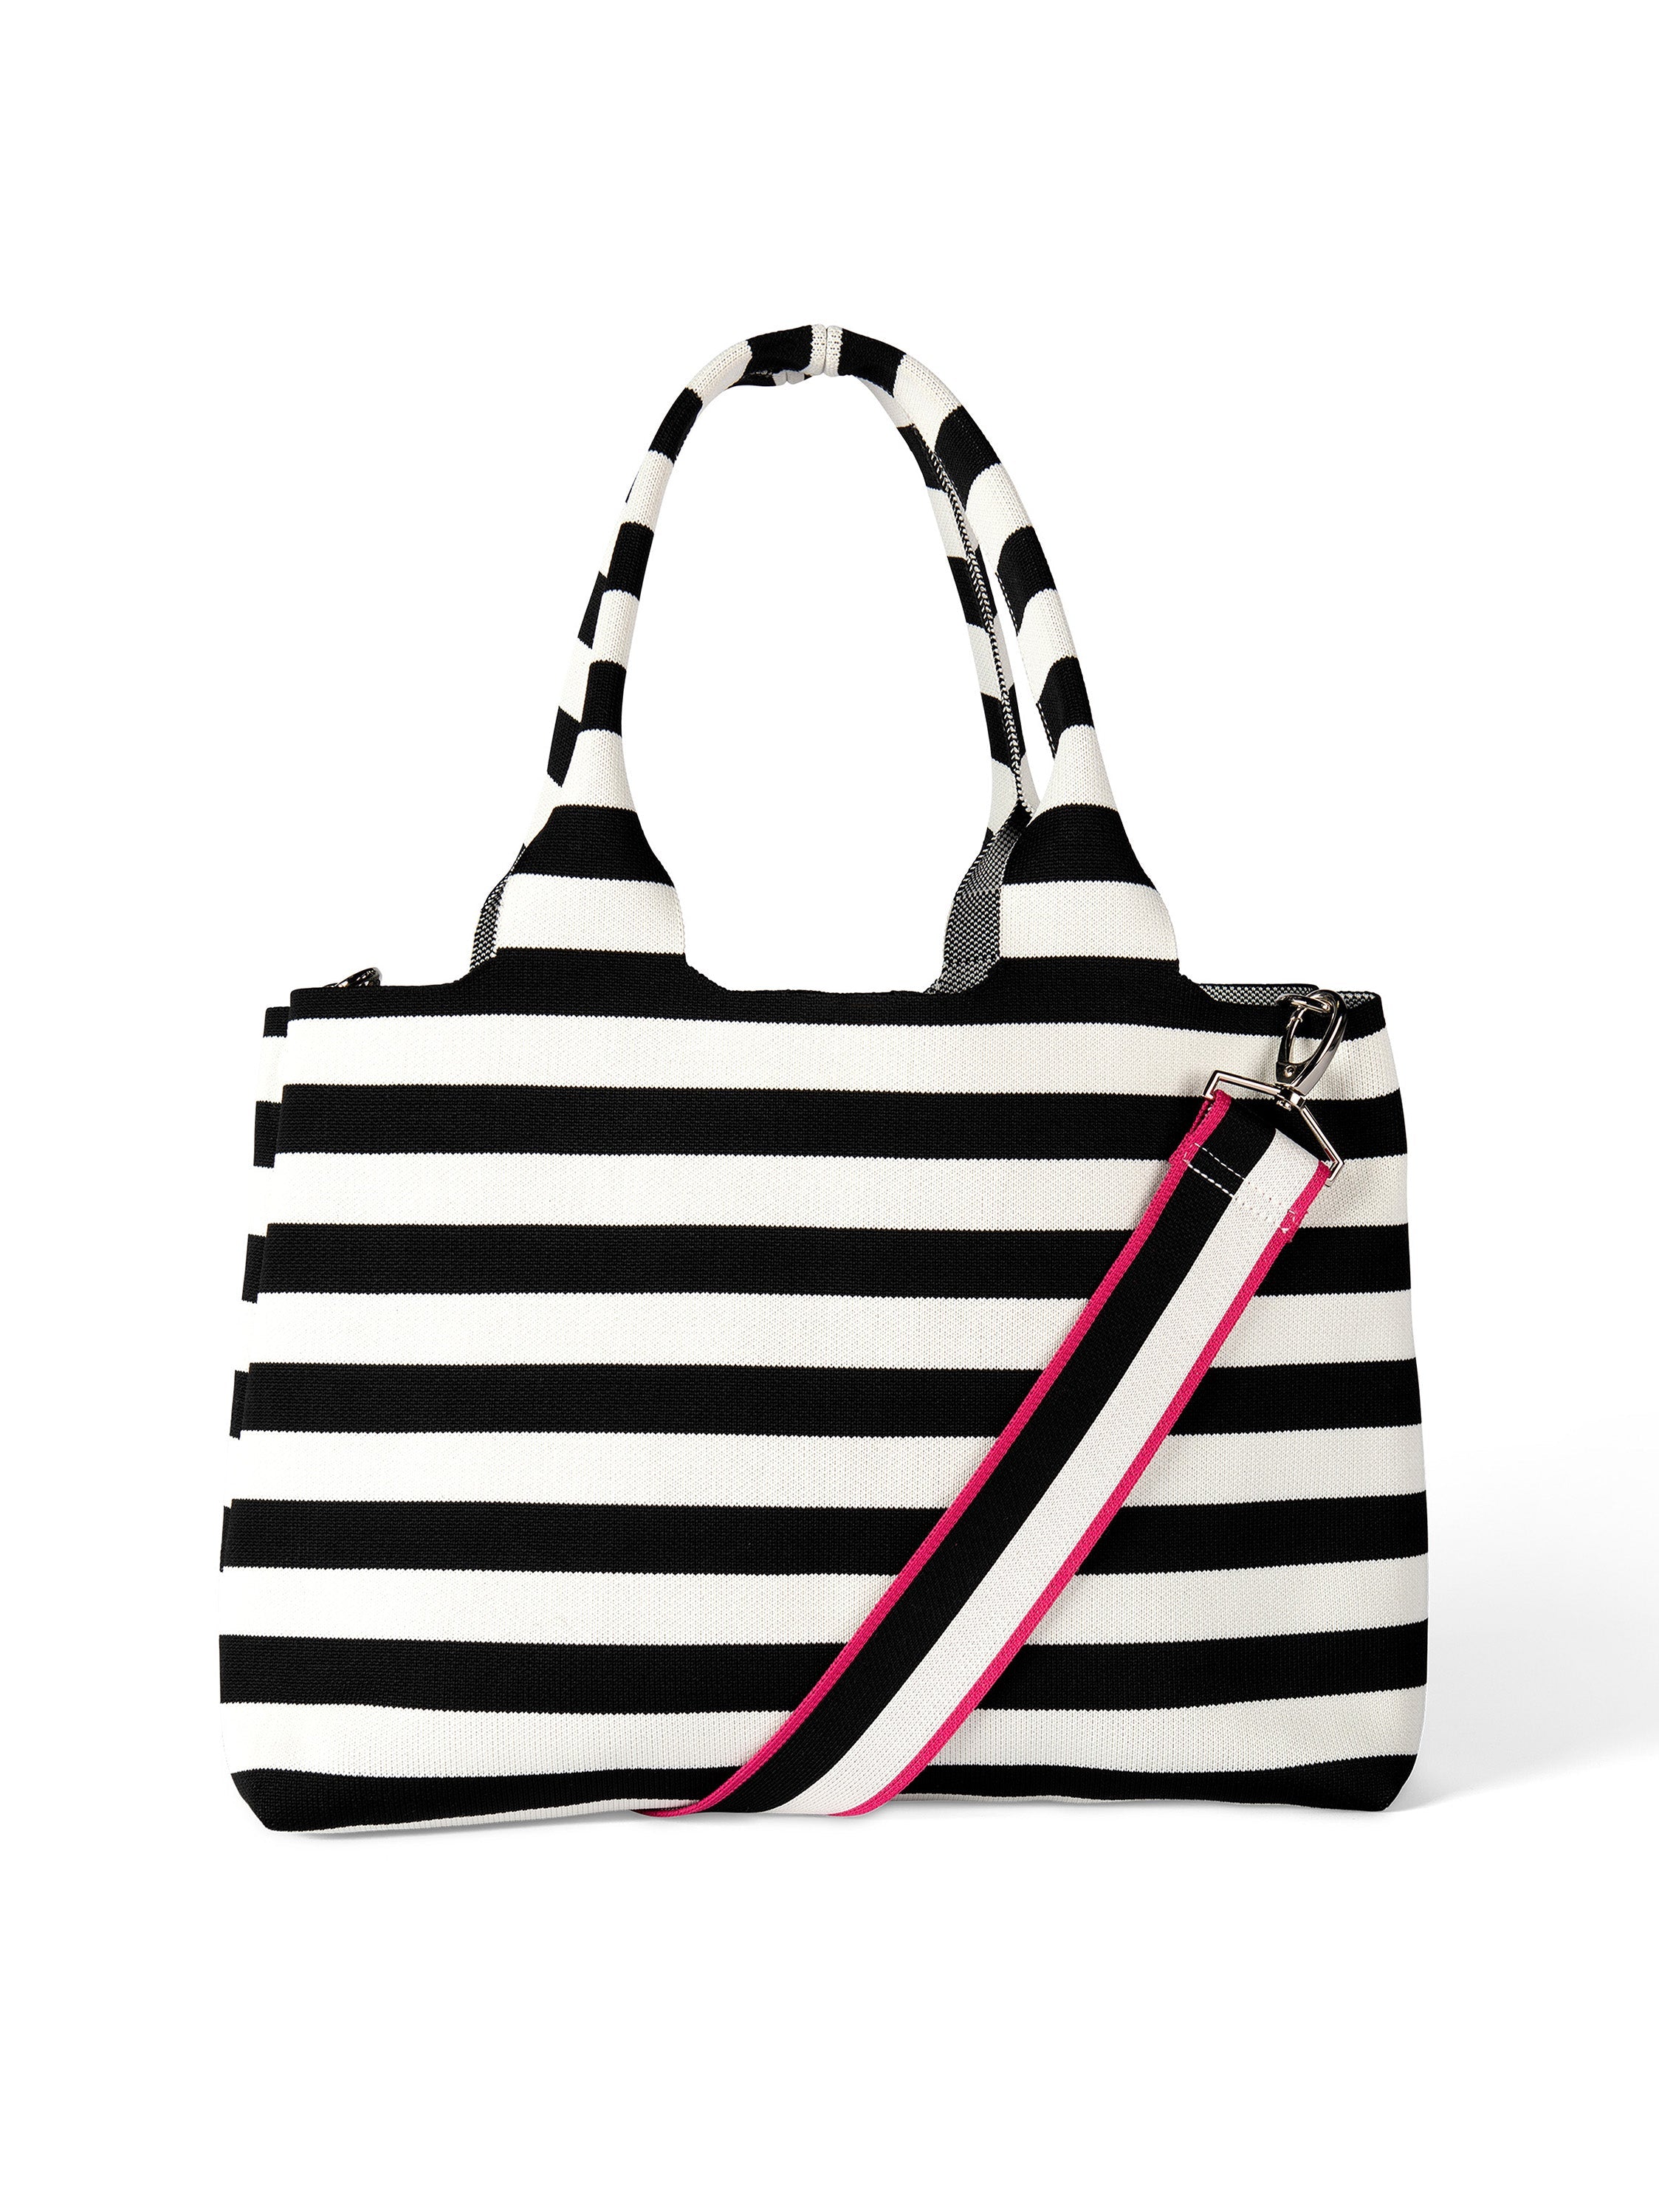 MARISOL tote Black and White Stripe - Lesley Evers-Accessories-Giftable-Gifts